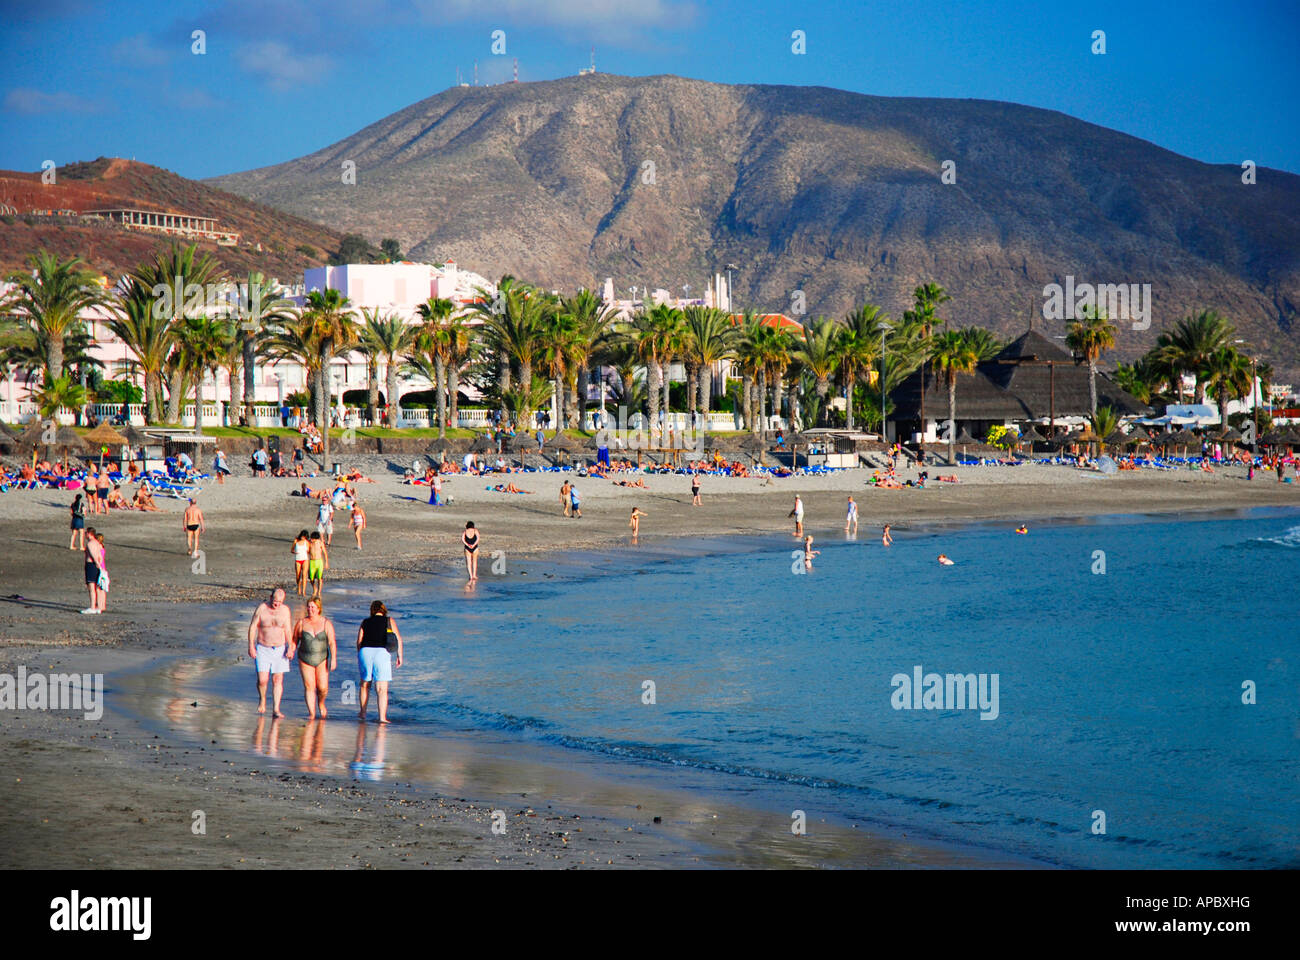 Man Sunny Beach Spain Southern Europe High Resolution Stock Photography and  Images - Alamy